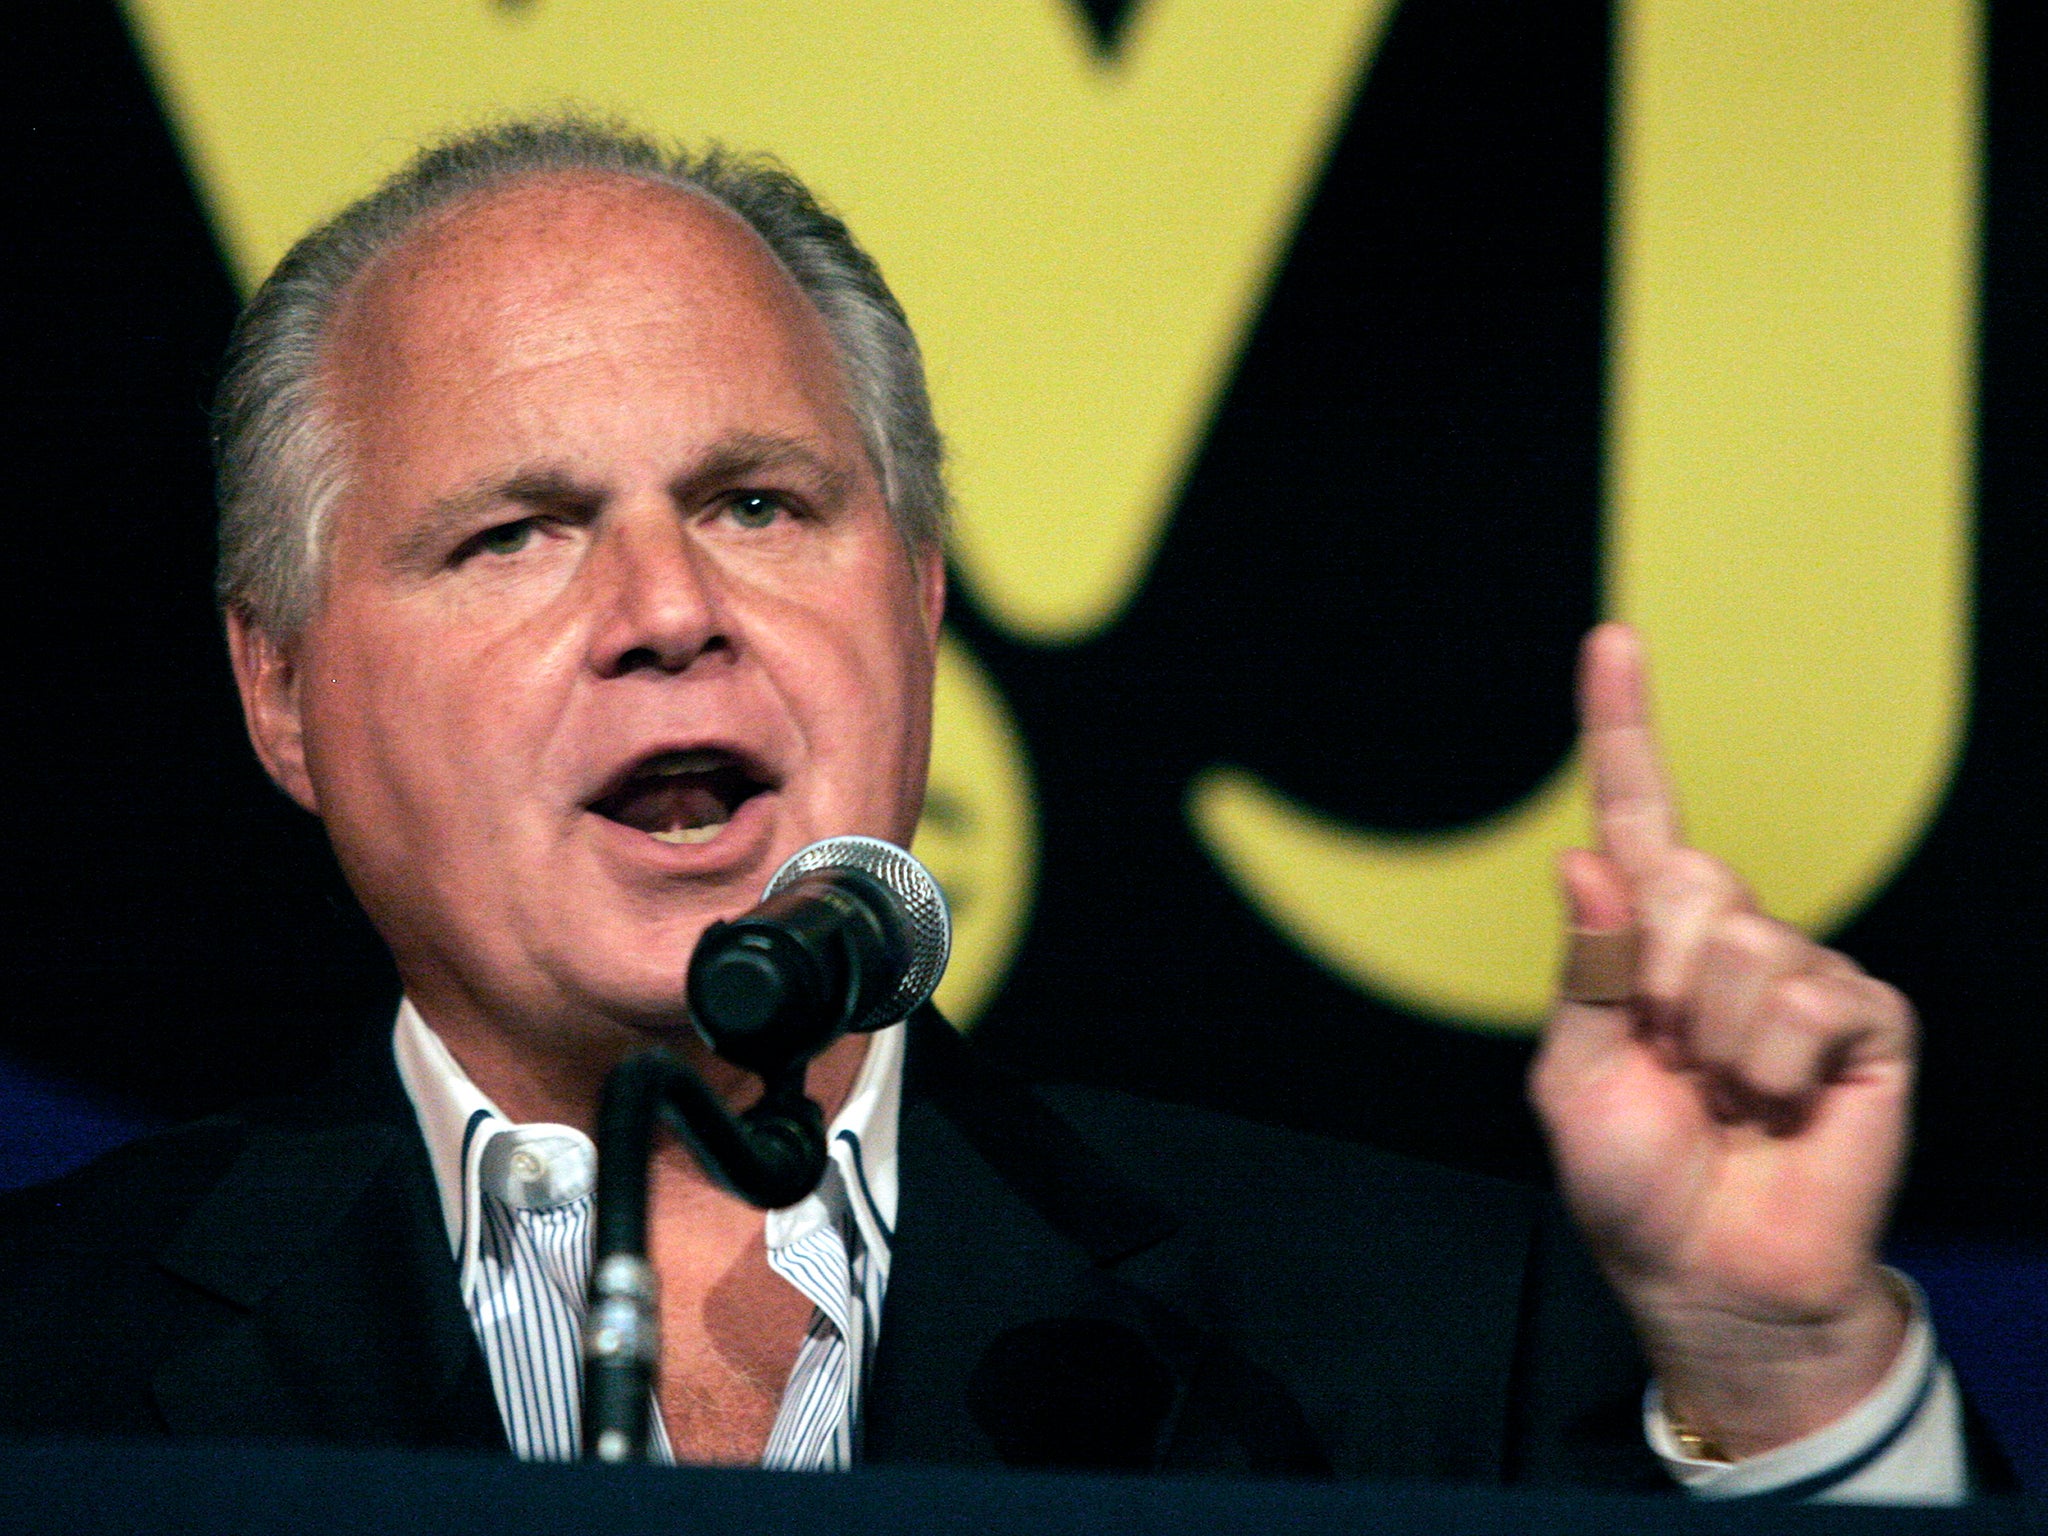 Rush Limbaugh courted controversy throughout his highly successful talk radio career